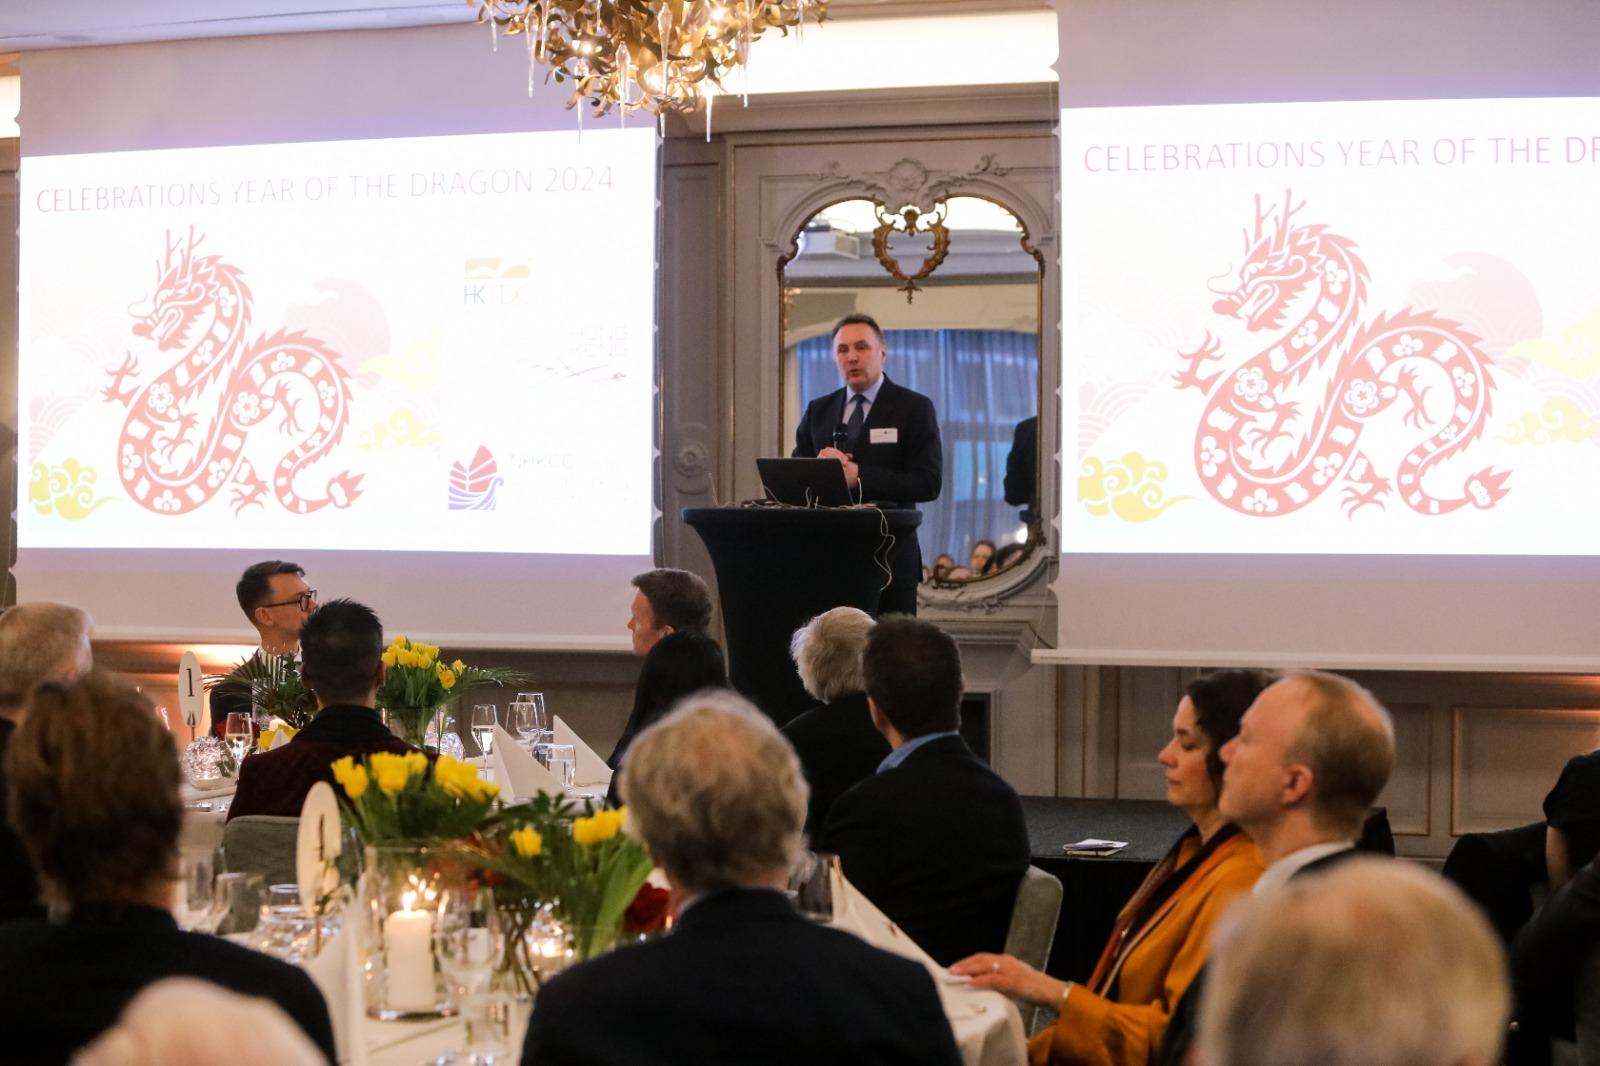 The Hong Kong Economic and Trade Office, London and the Norway-Hong Kong Chamber of Commerce cohosted a Year of the Dragon reception in Oslo, Norway, on February 27 (Oslo time). Photo shows the State Secretary of the Ministry of Trade, Industry and Fisheries in Norway, Mr Tore O Sandvik, delivering a speech at the reception.